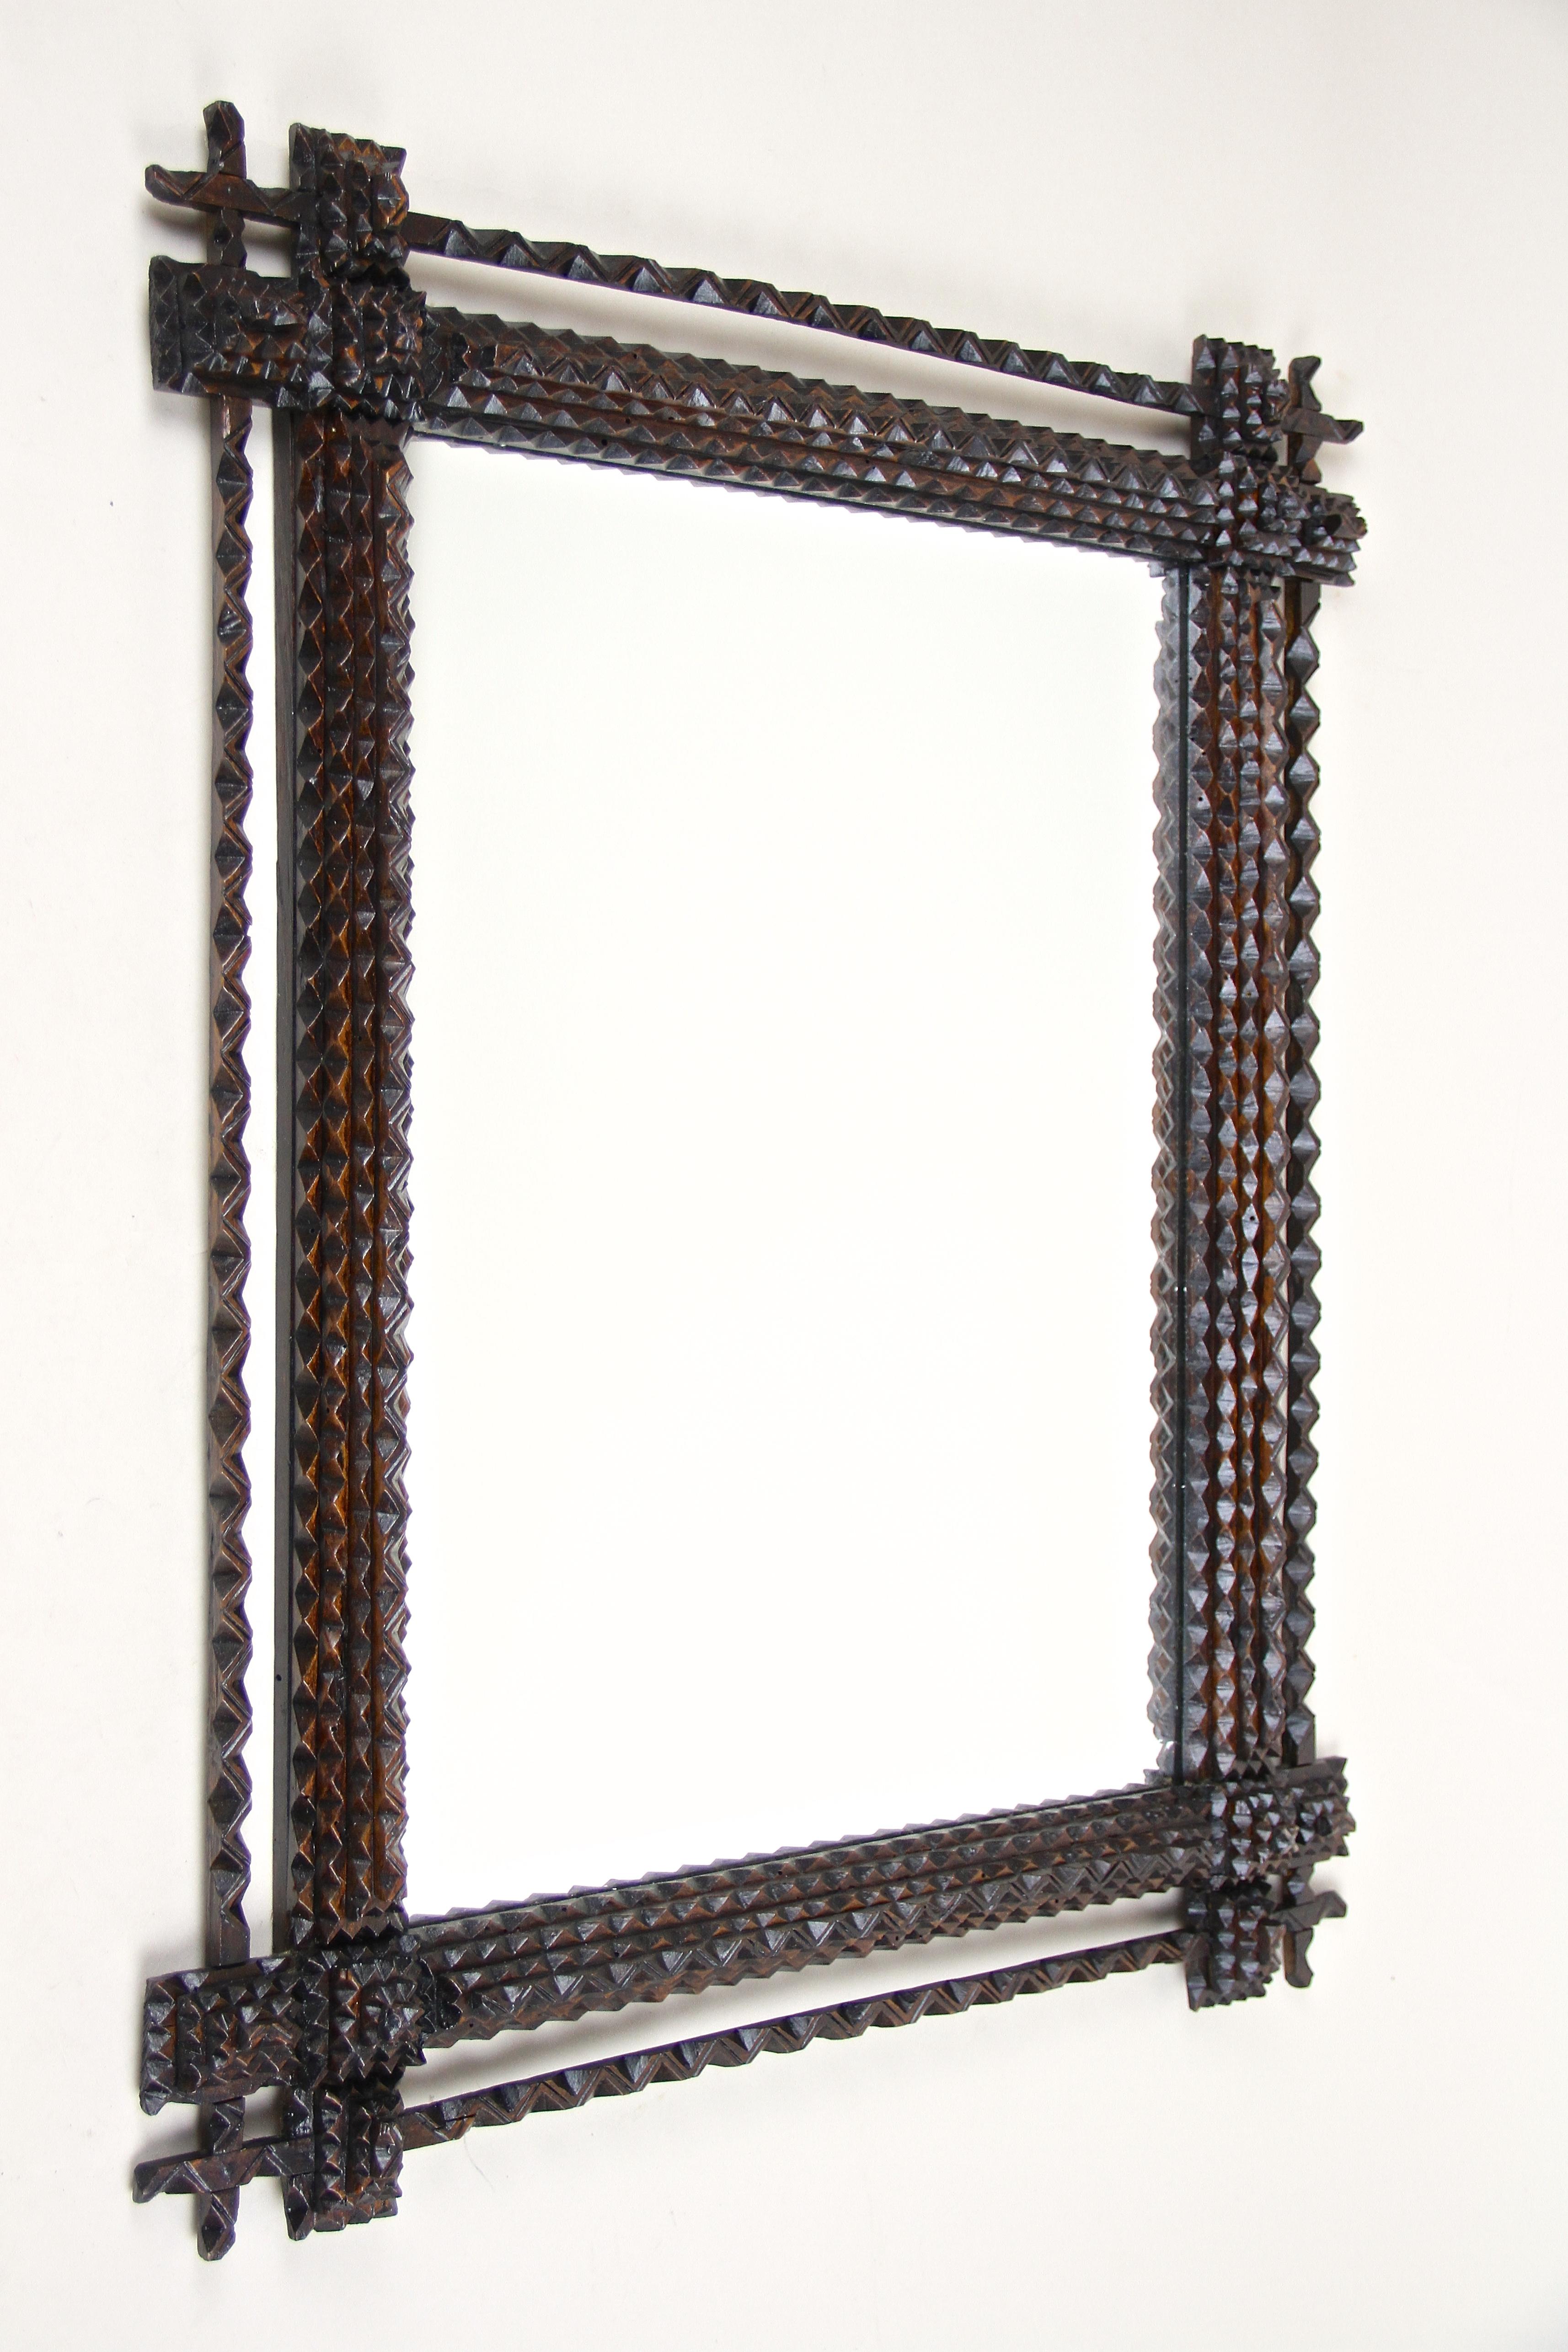 Unusual rustic Tramp Art mirror from the late 19th century in Austria around 1870. This wooden wall mirror has been effortfully hand carved out of basswood and comes with a dark brown stained surface in great original condition. Highlighted with a